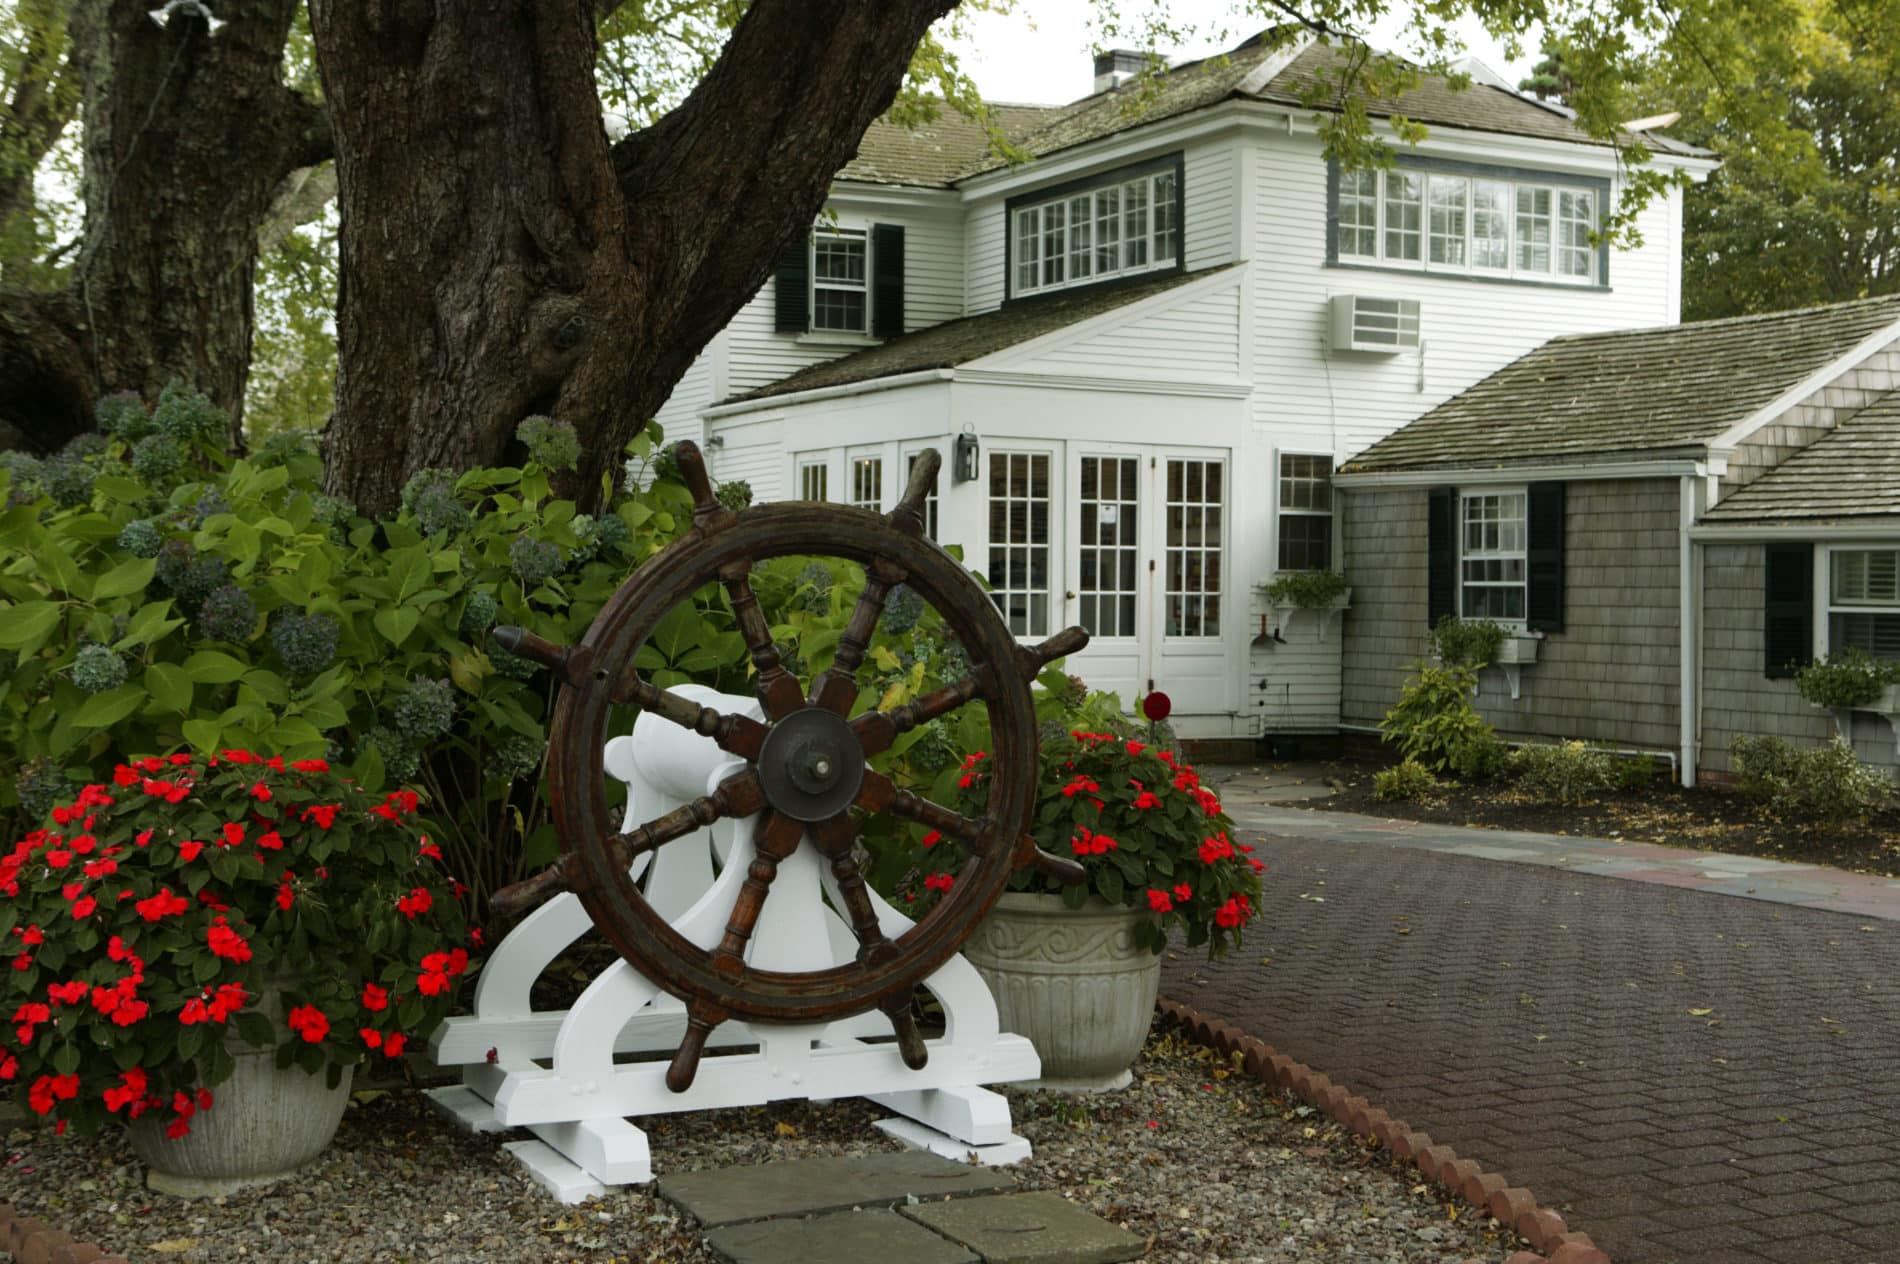 Exterior view of Captain's House Inn with brick drive, tall mature trees and a captain's wheel flanked by red flowers